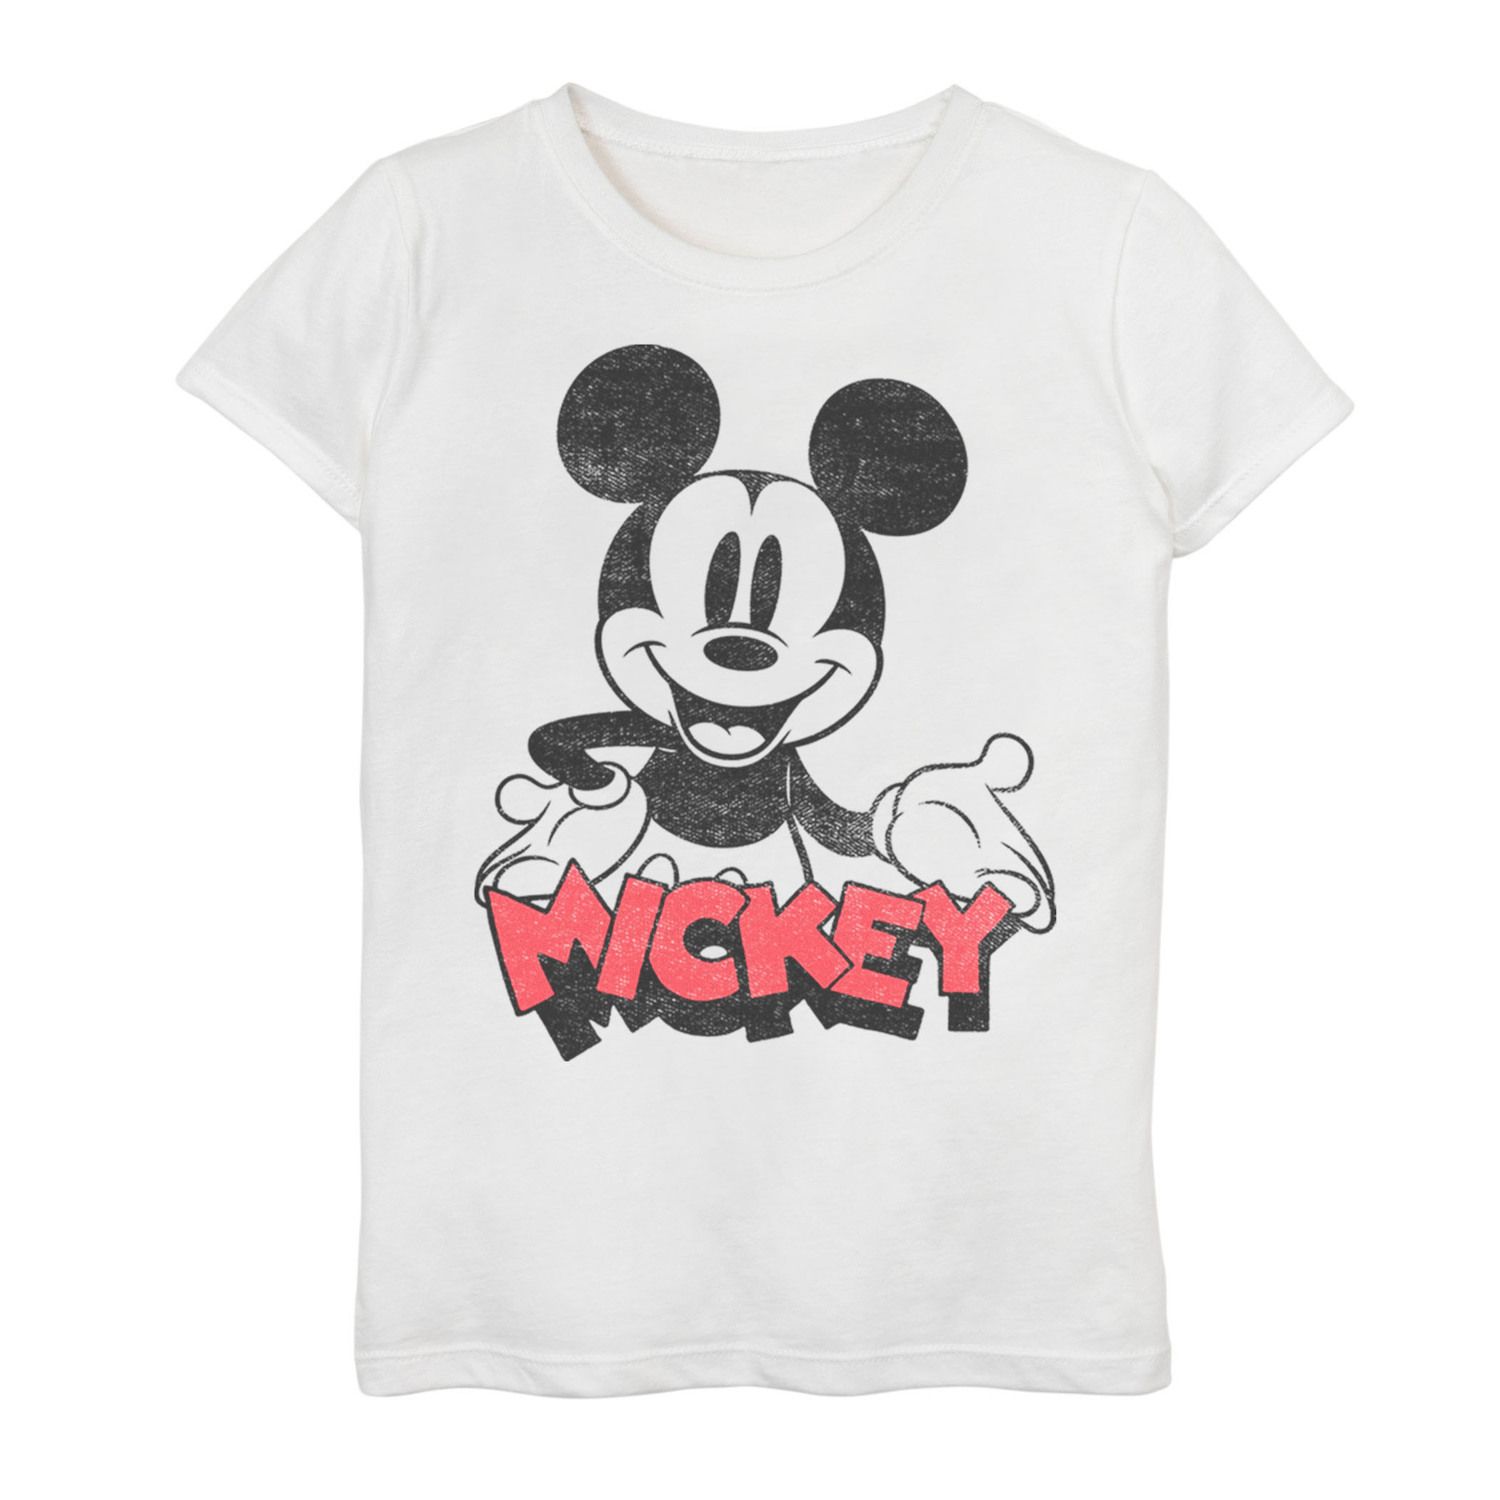 Image for Disney 's Mickey Mouse Girls 7-16 Happy Graphic Tee at Kohl's.